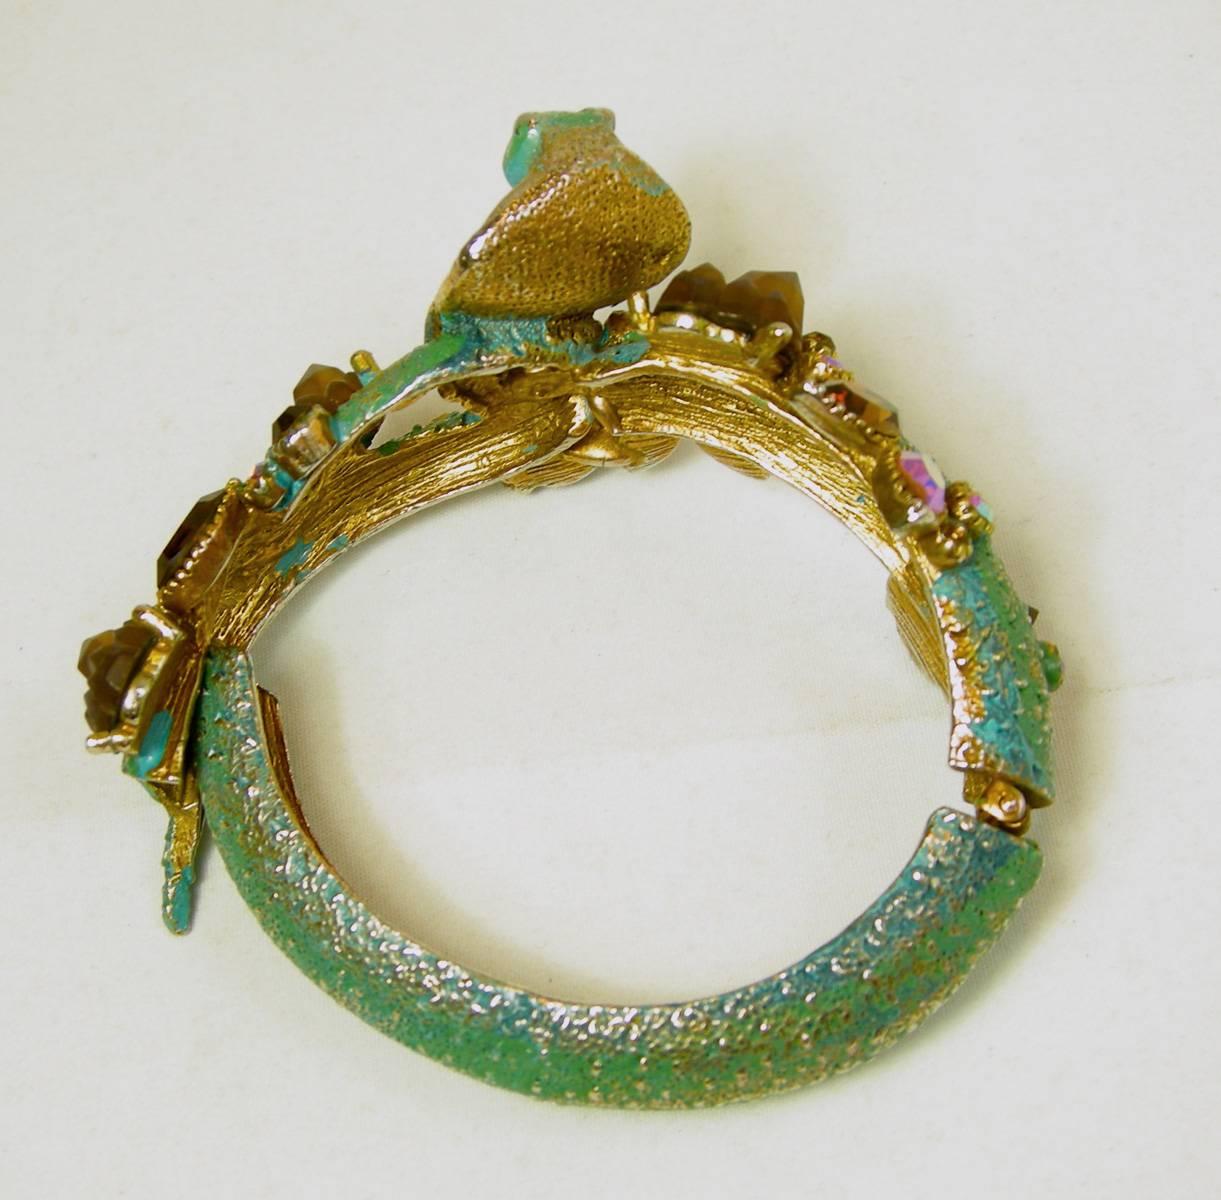 This is the very famous and highly collectible vintage HAR cobra bracelet that every one seeks to complete their parure.  It is rare to sell the bracelet alone, but we are doing it.  The cobra has green enameling with Aurora Borealis stones. It also